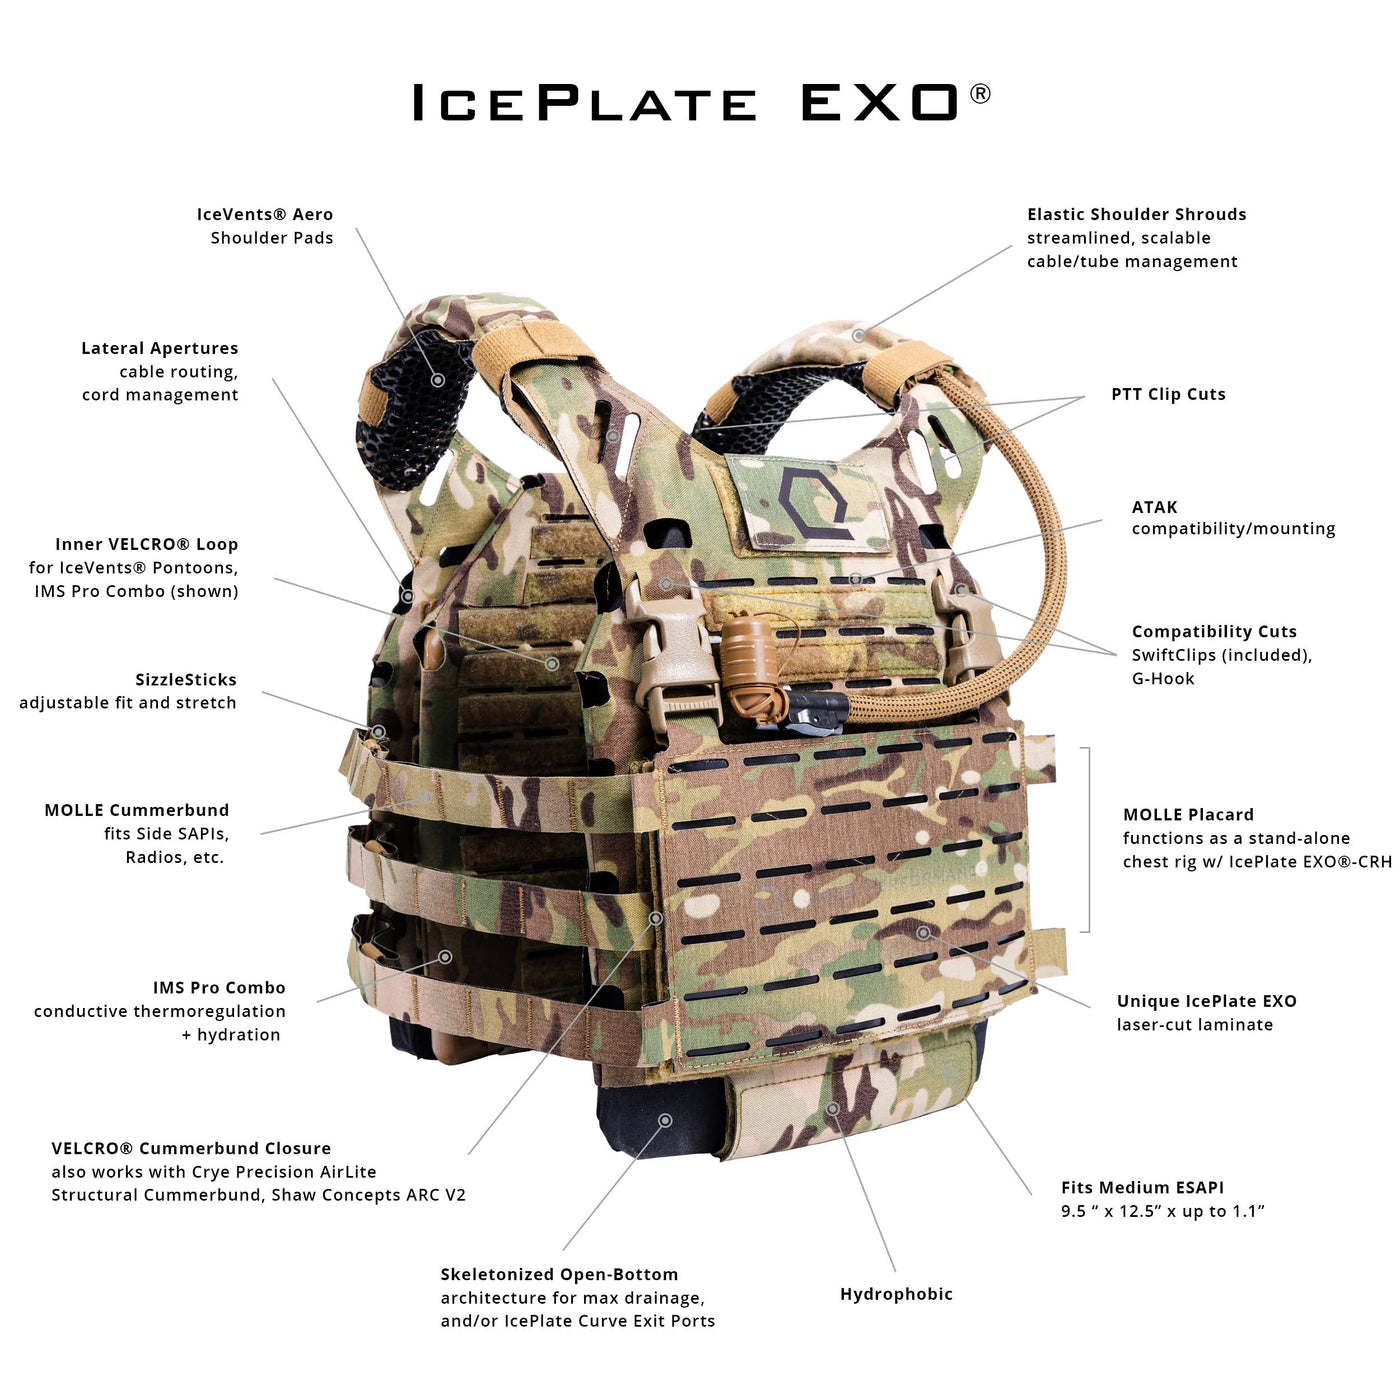 IcePlate EXO®